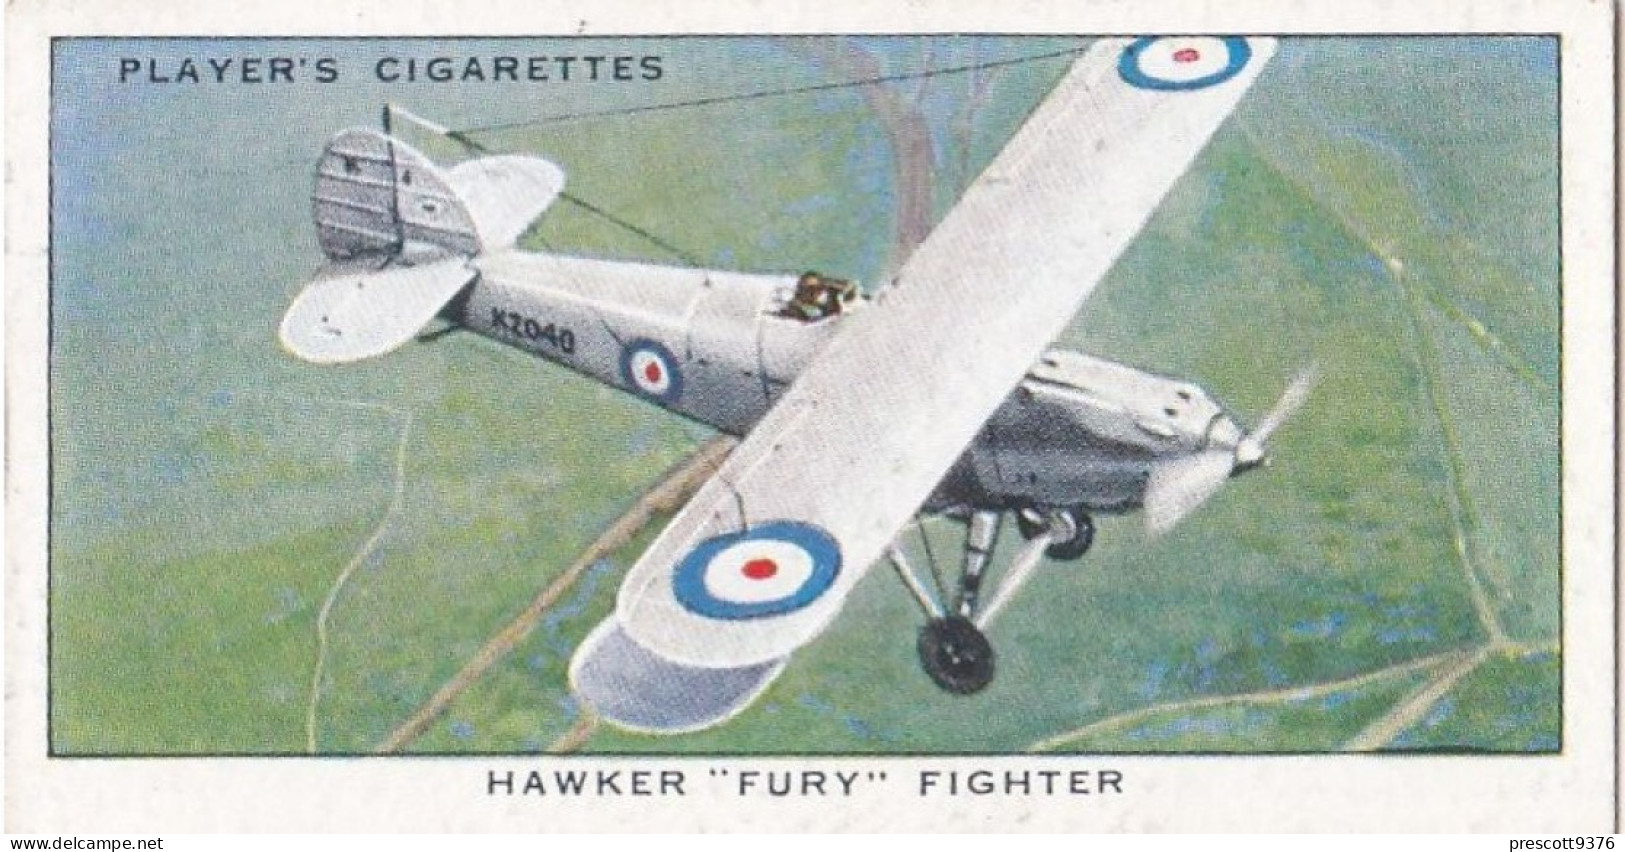 26 Hawker Fury Fighter - Aircraft Of The Royal Air Force 1938 - Players Original Cigarette Card - Military - Player's